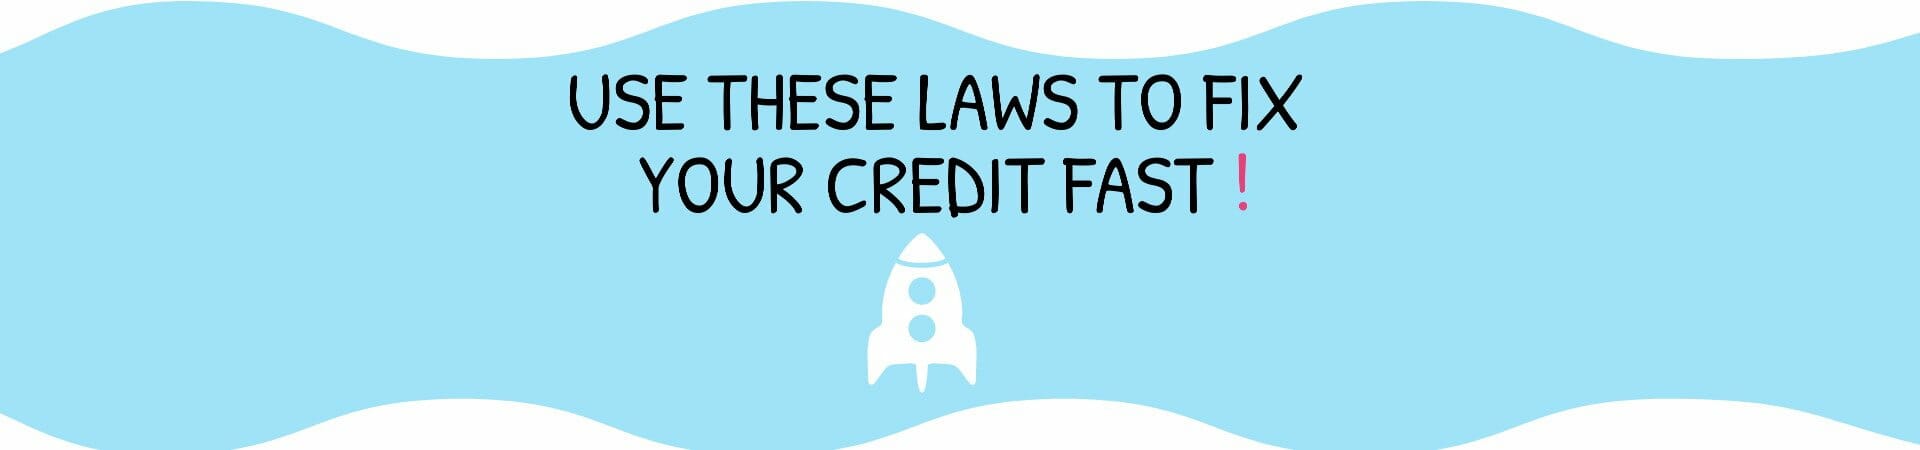 Credit Repair Laws You Can Use To Fix Your Credit